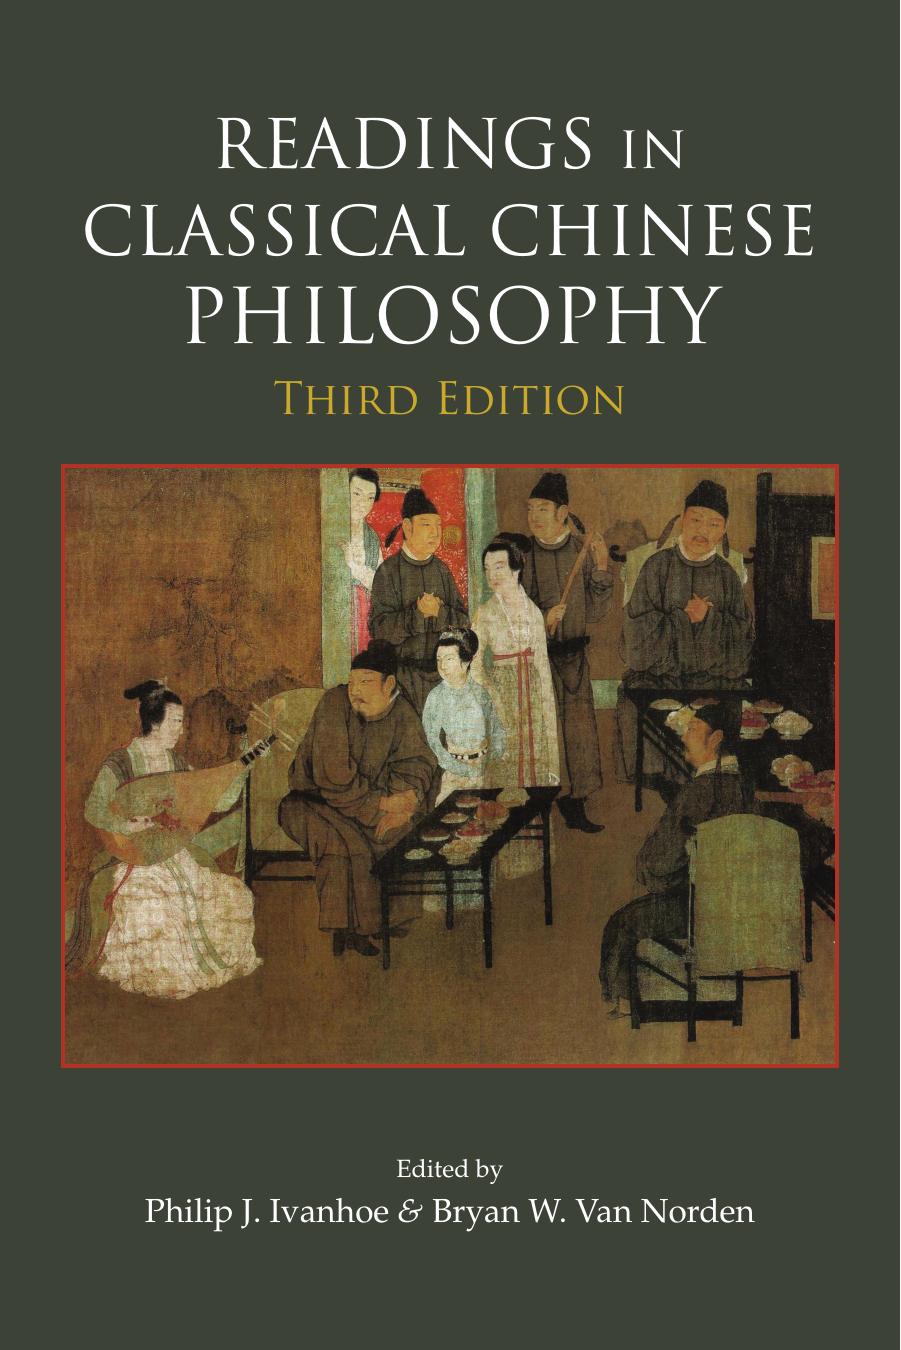 Readings in Classical Chinese Philosophy, Third Edition by Philip J. Ivanhoe (ed.) Bryan W. Van Norden (ed.)